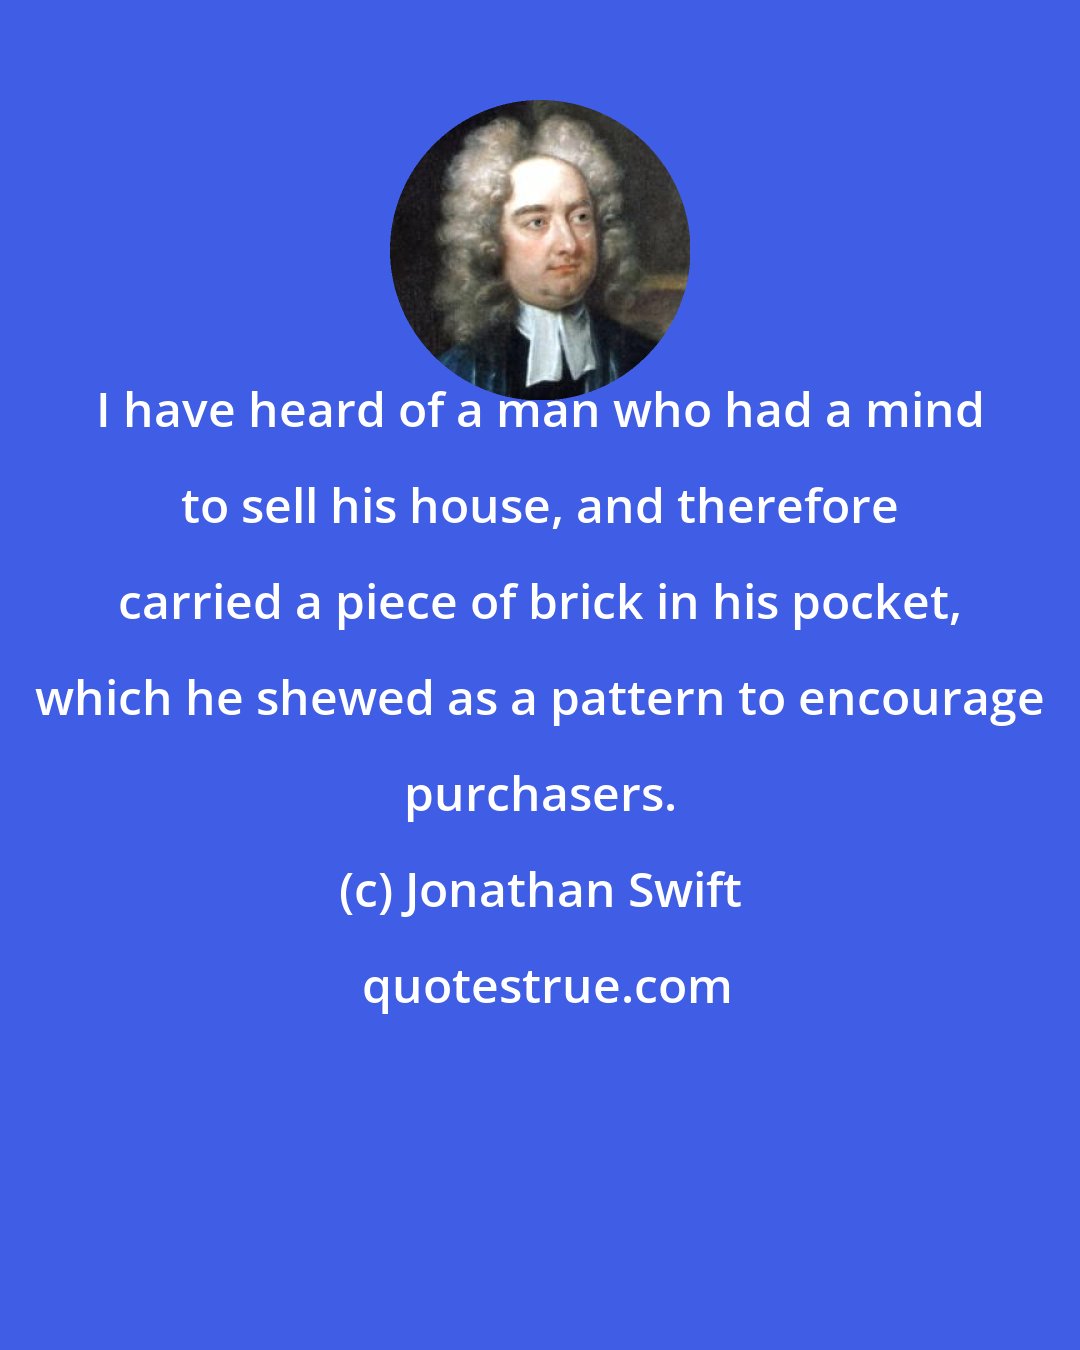 Jonathan Swift: I have heard of a man who had a mind to sell his house, and therefore carried a piece of brick in his pocket, which he shewed as a pattern to encourage purchasers.